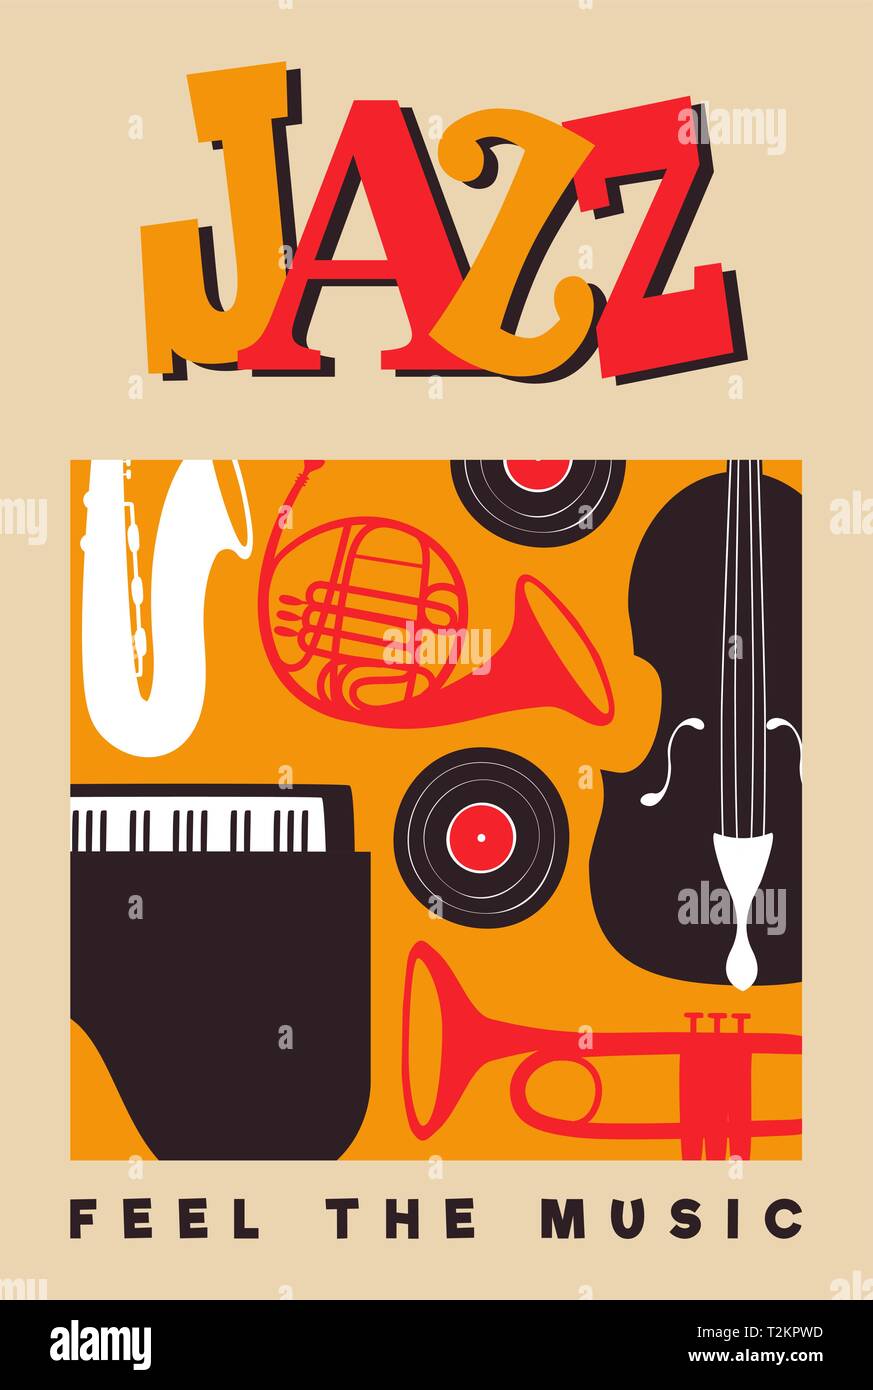 Jazz Day poster illustration for music festival event or concert. Retro background with mid century vintage style band instruments. Stock Vector